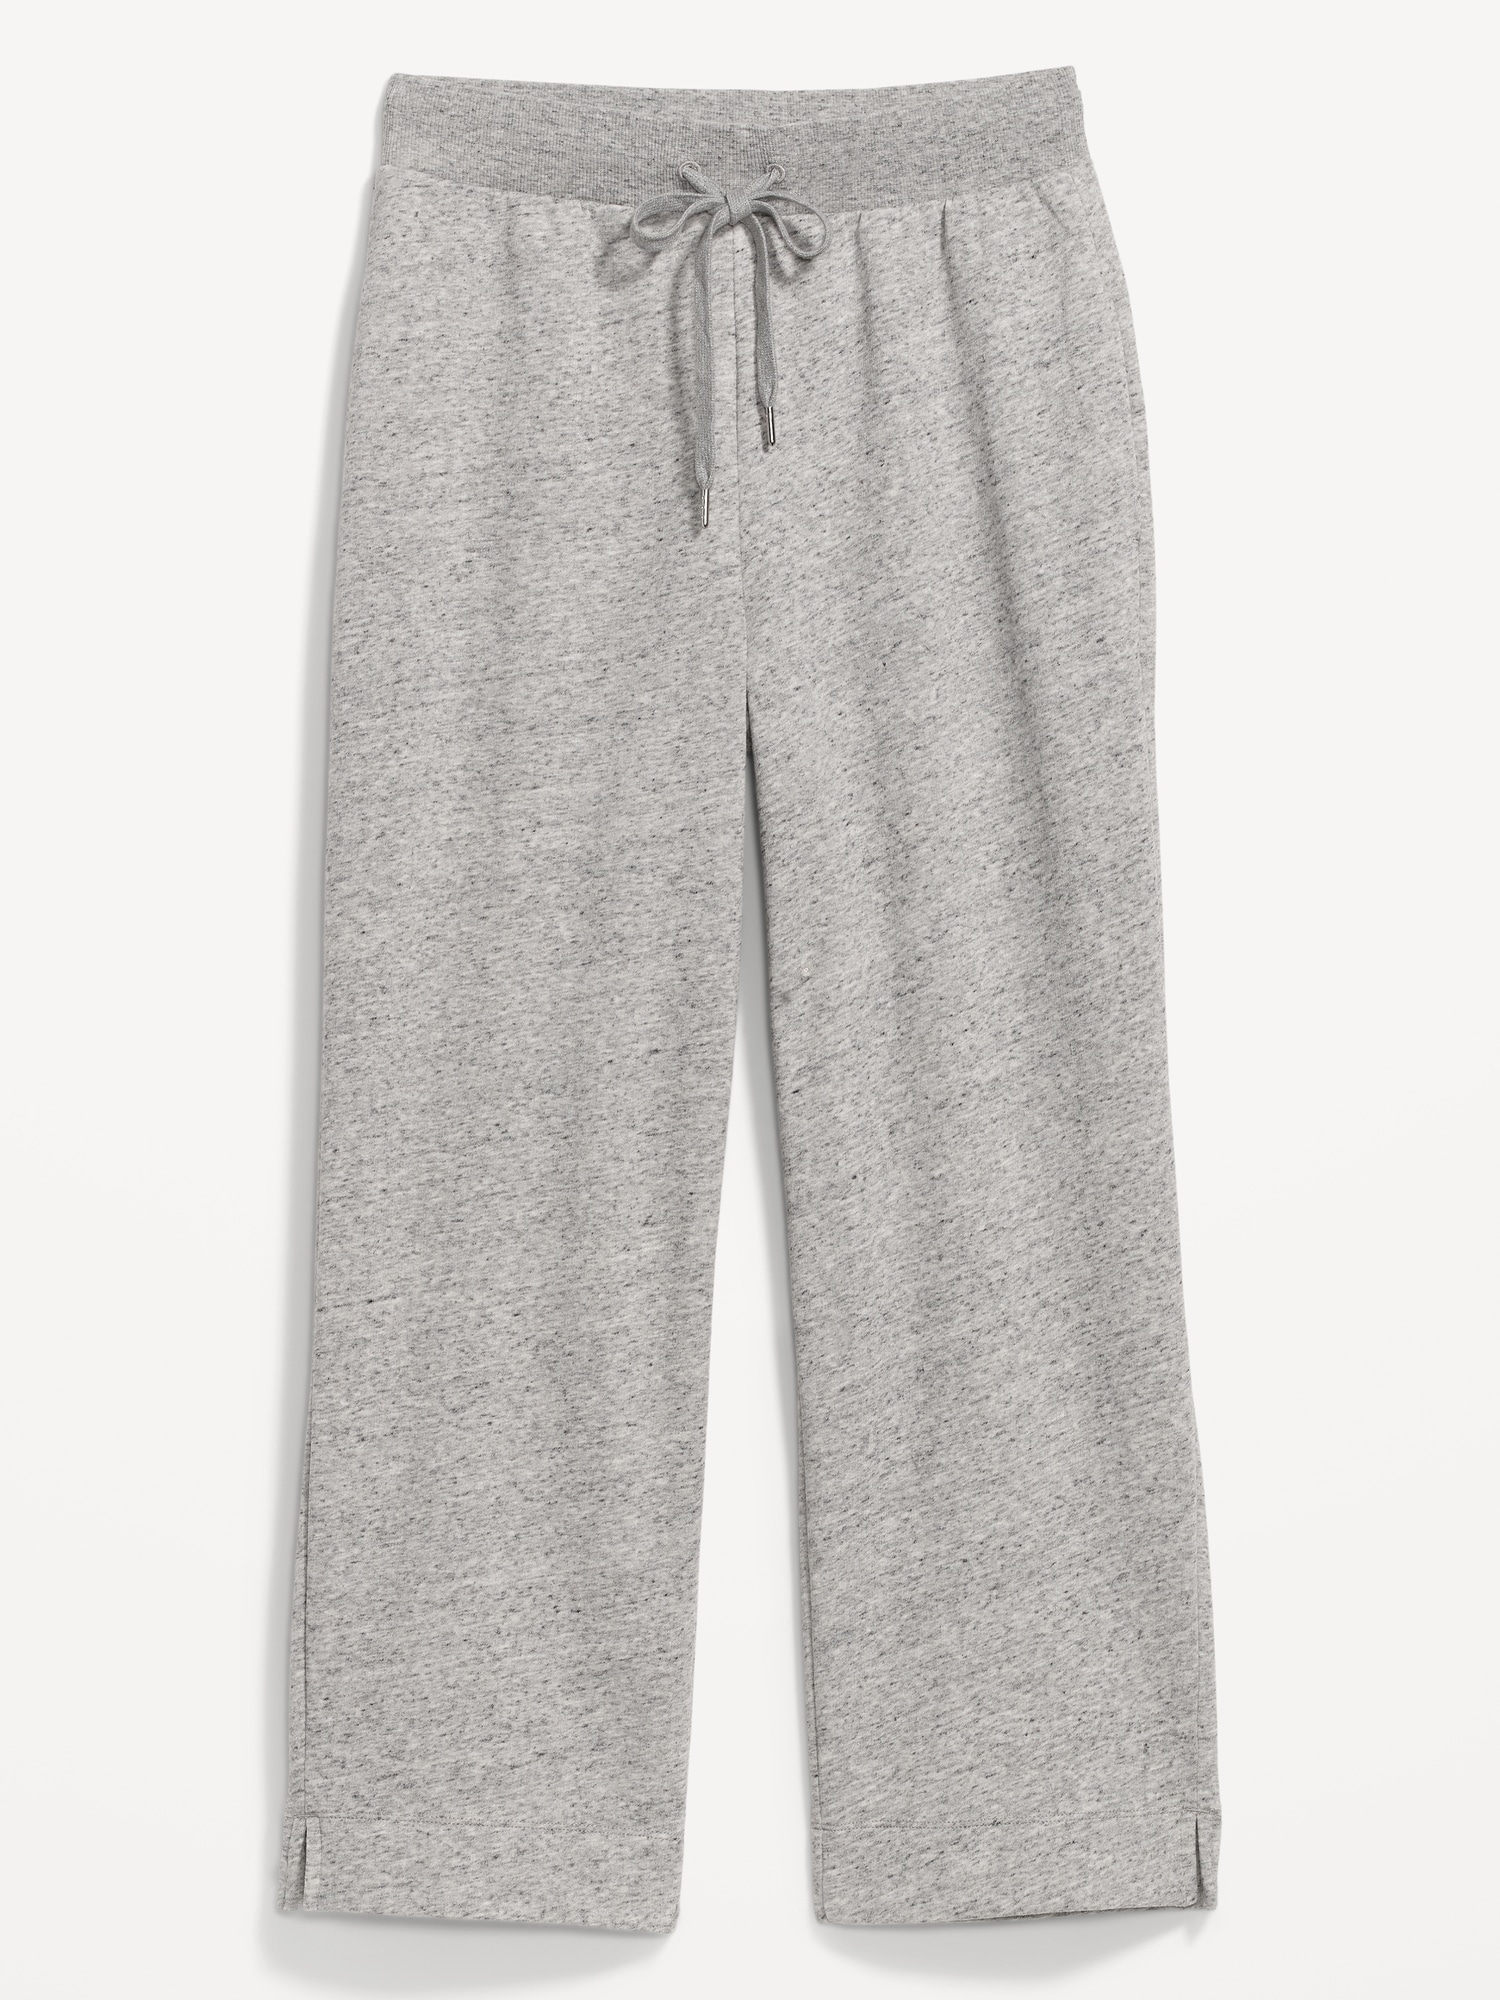 High-Waisted Cropped Straight Sweatpants for Women | Old Navy